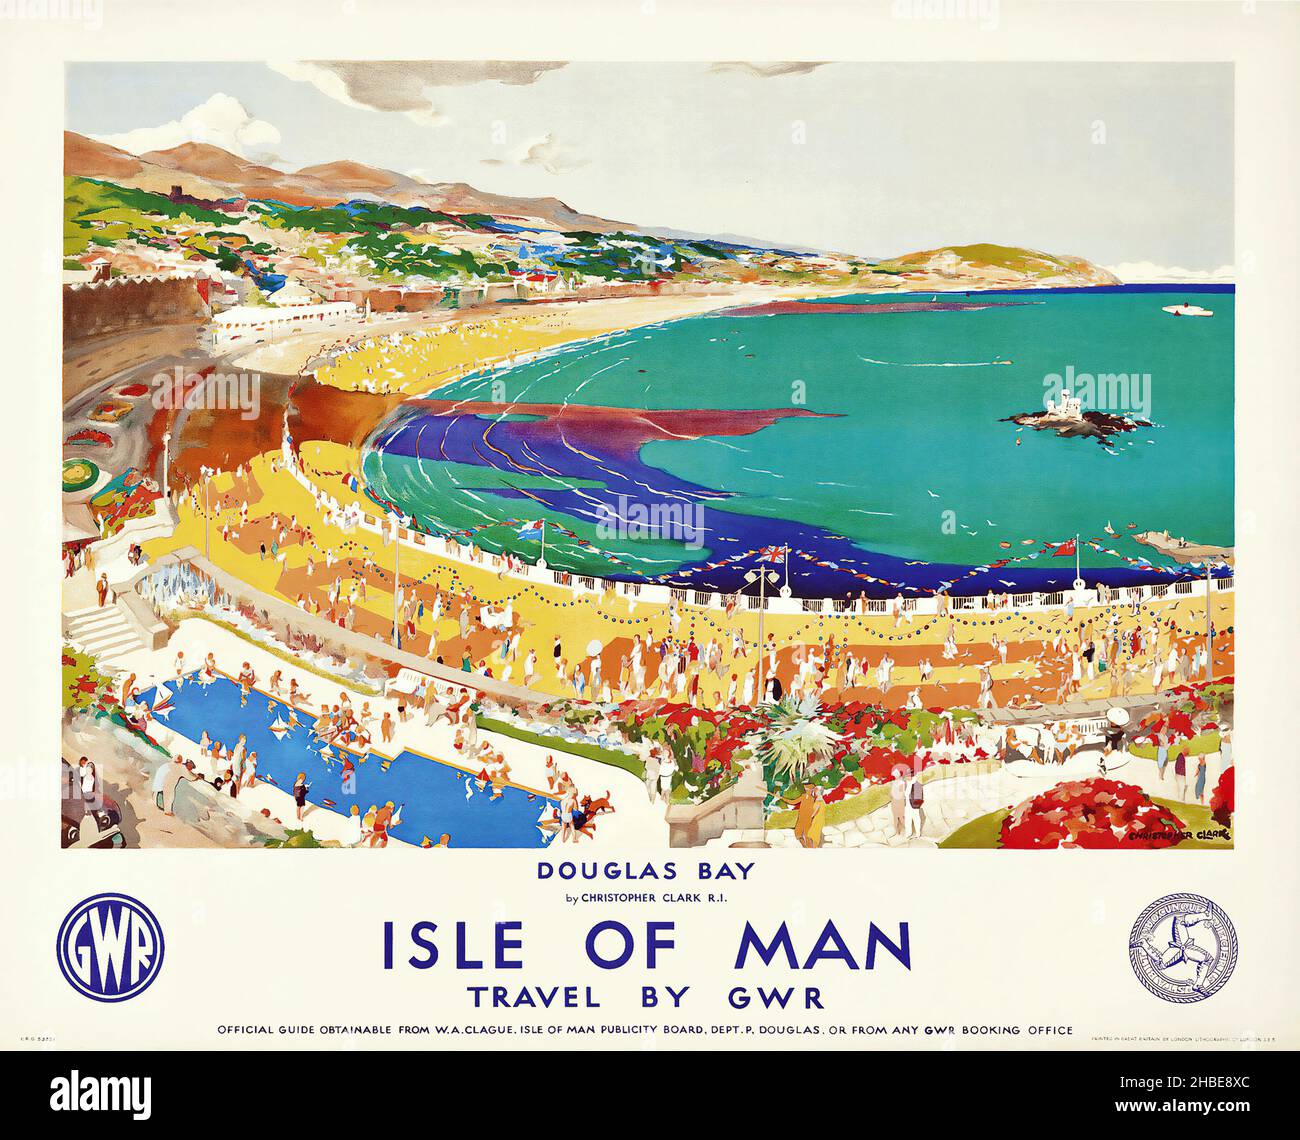 Vintage advertisement poster: ISLE OF MAN travel poster 'Travel by GWR'. Douglas Bay. c 1930. CLARK, CHRISTOPHER (1875-1942) Stock Photo